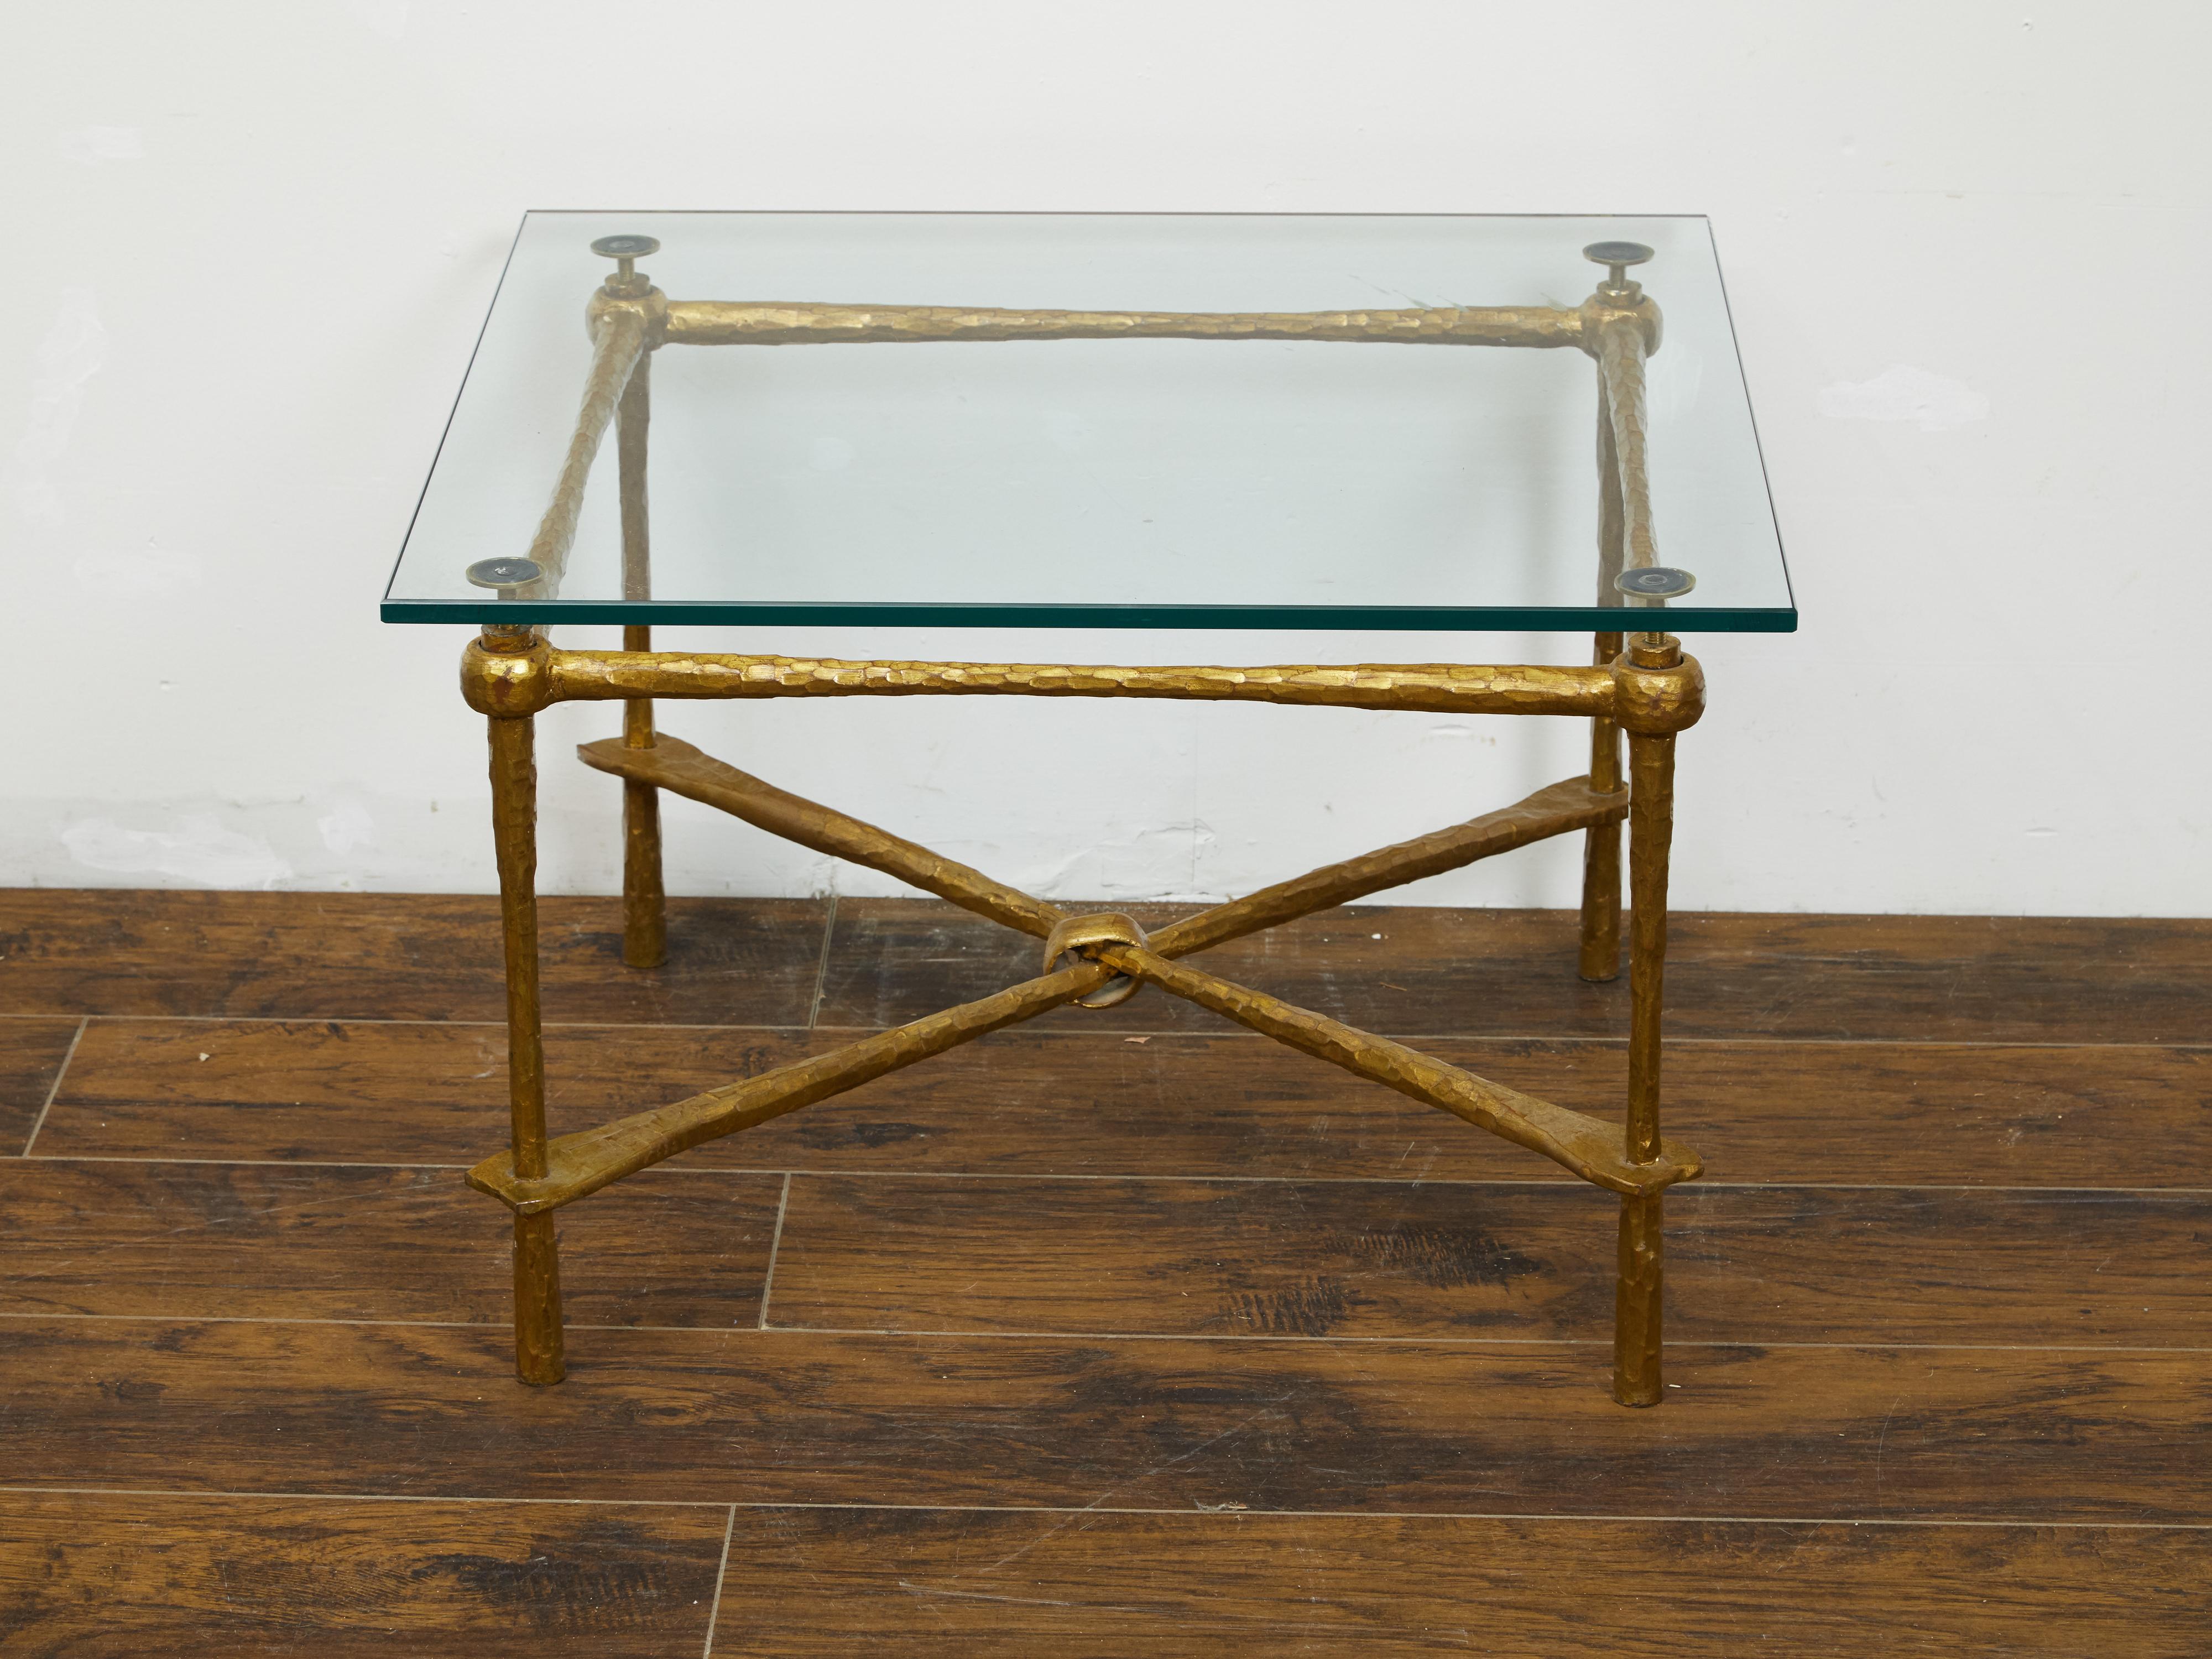 An Italian gilt metal coffee table from the mid 20th century, with glass top and hammered style accents. Created in Italy during the midcentury period, this gilt metal table features a square glass top sitting above a gilt metal base with hammered